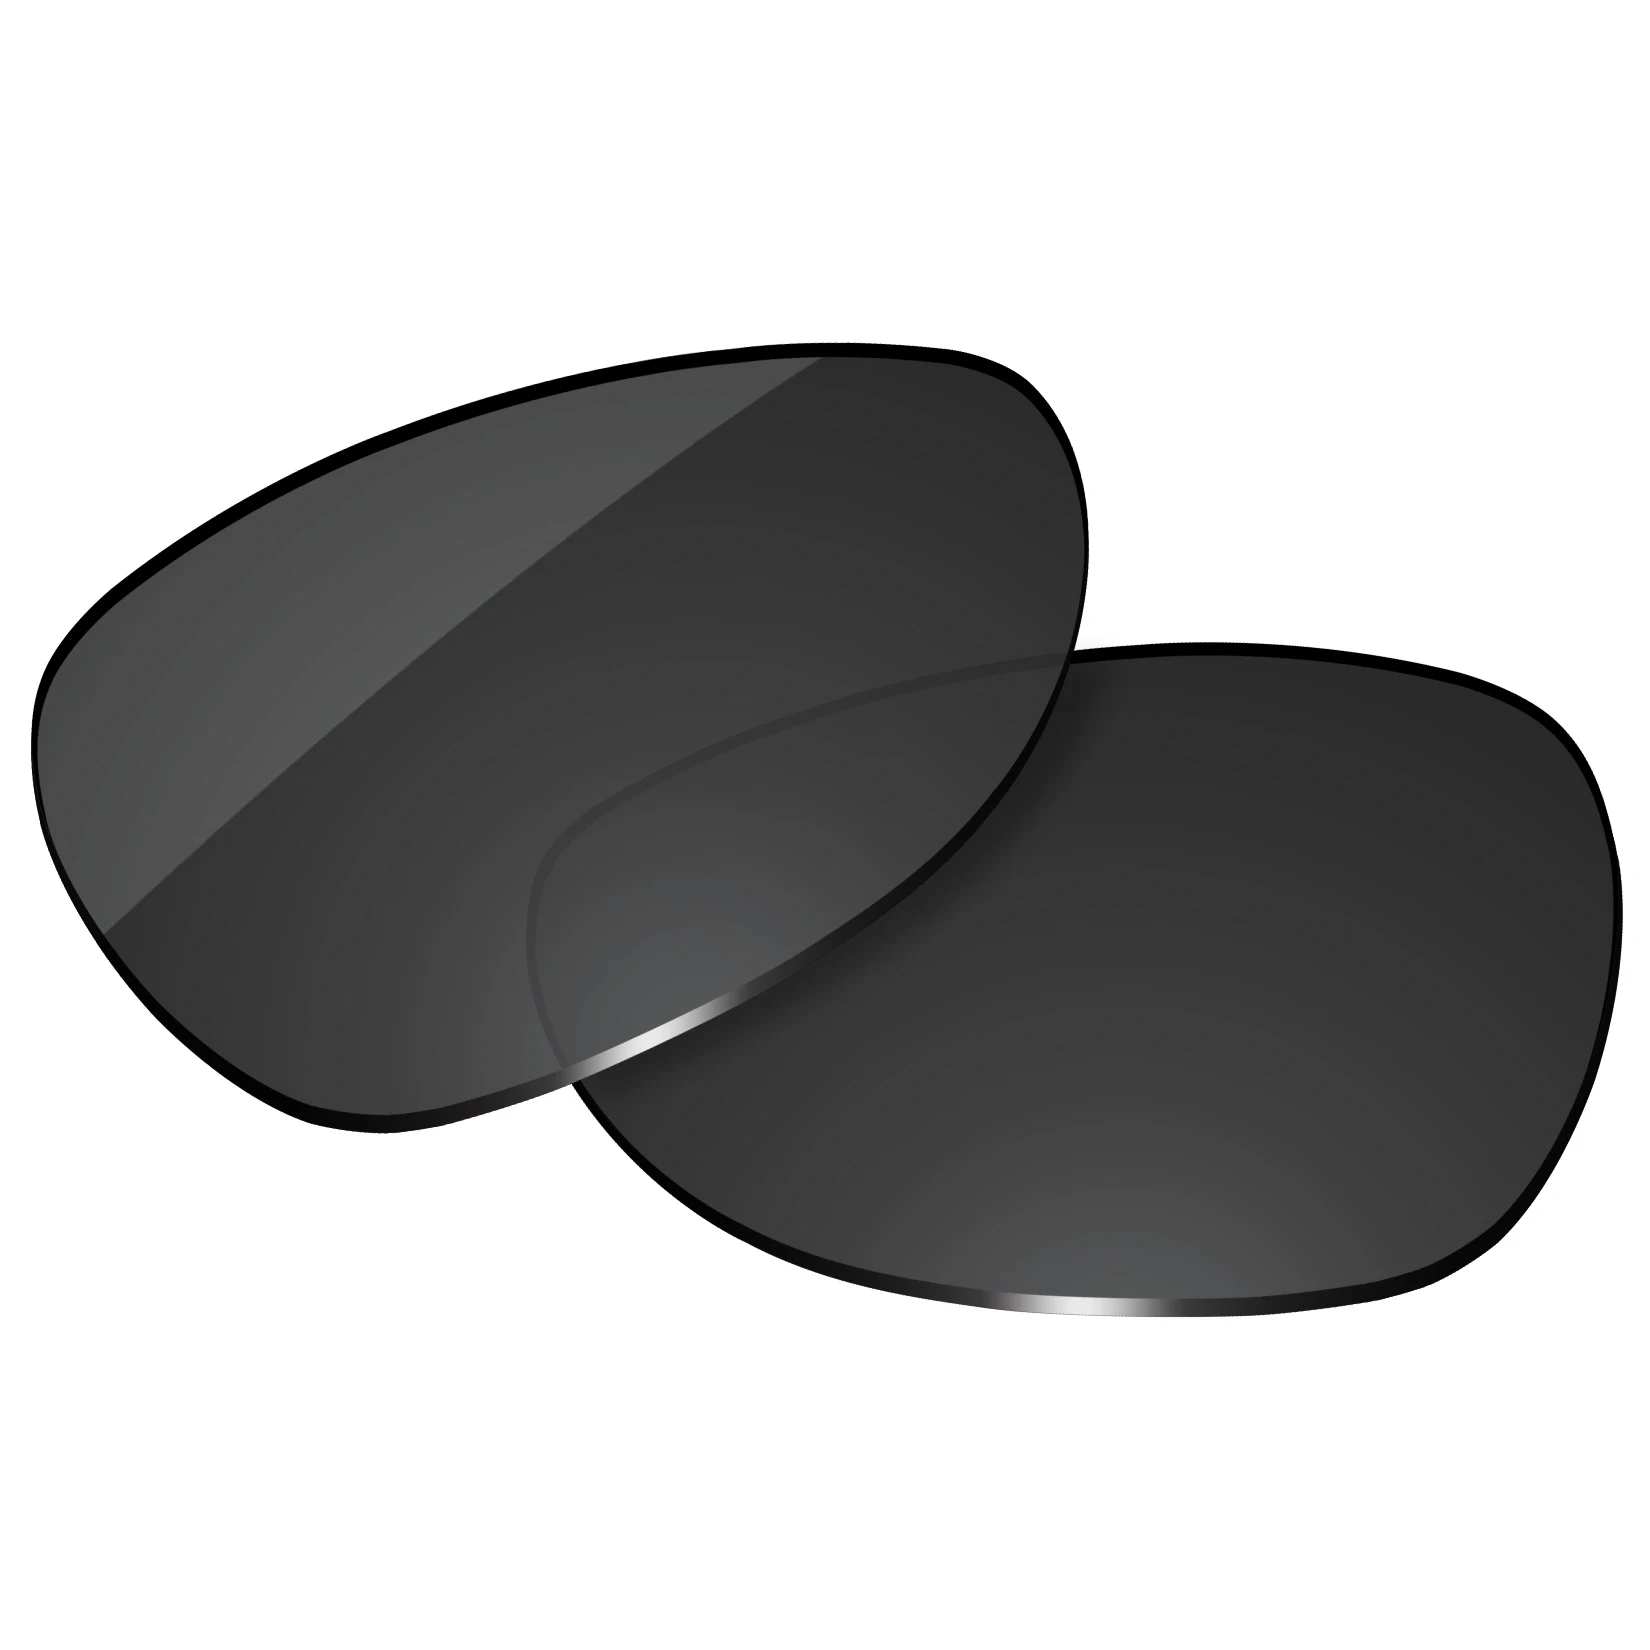 OOWLIT Polarized Replacement Lenses for-RayBan RB4162-59 Sunglasses (Lens Only)